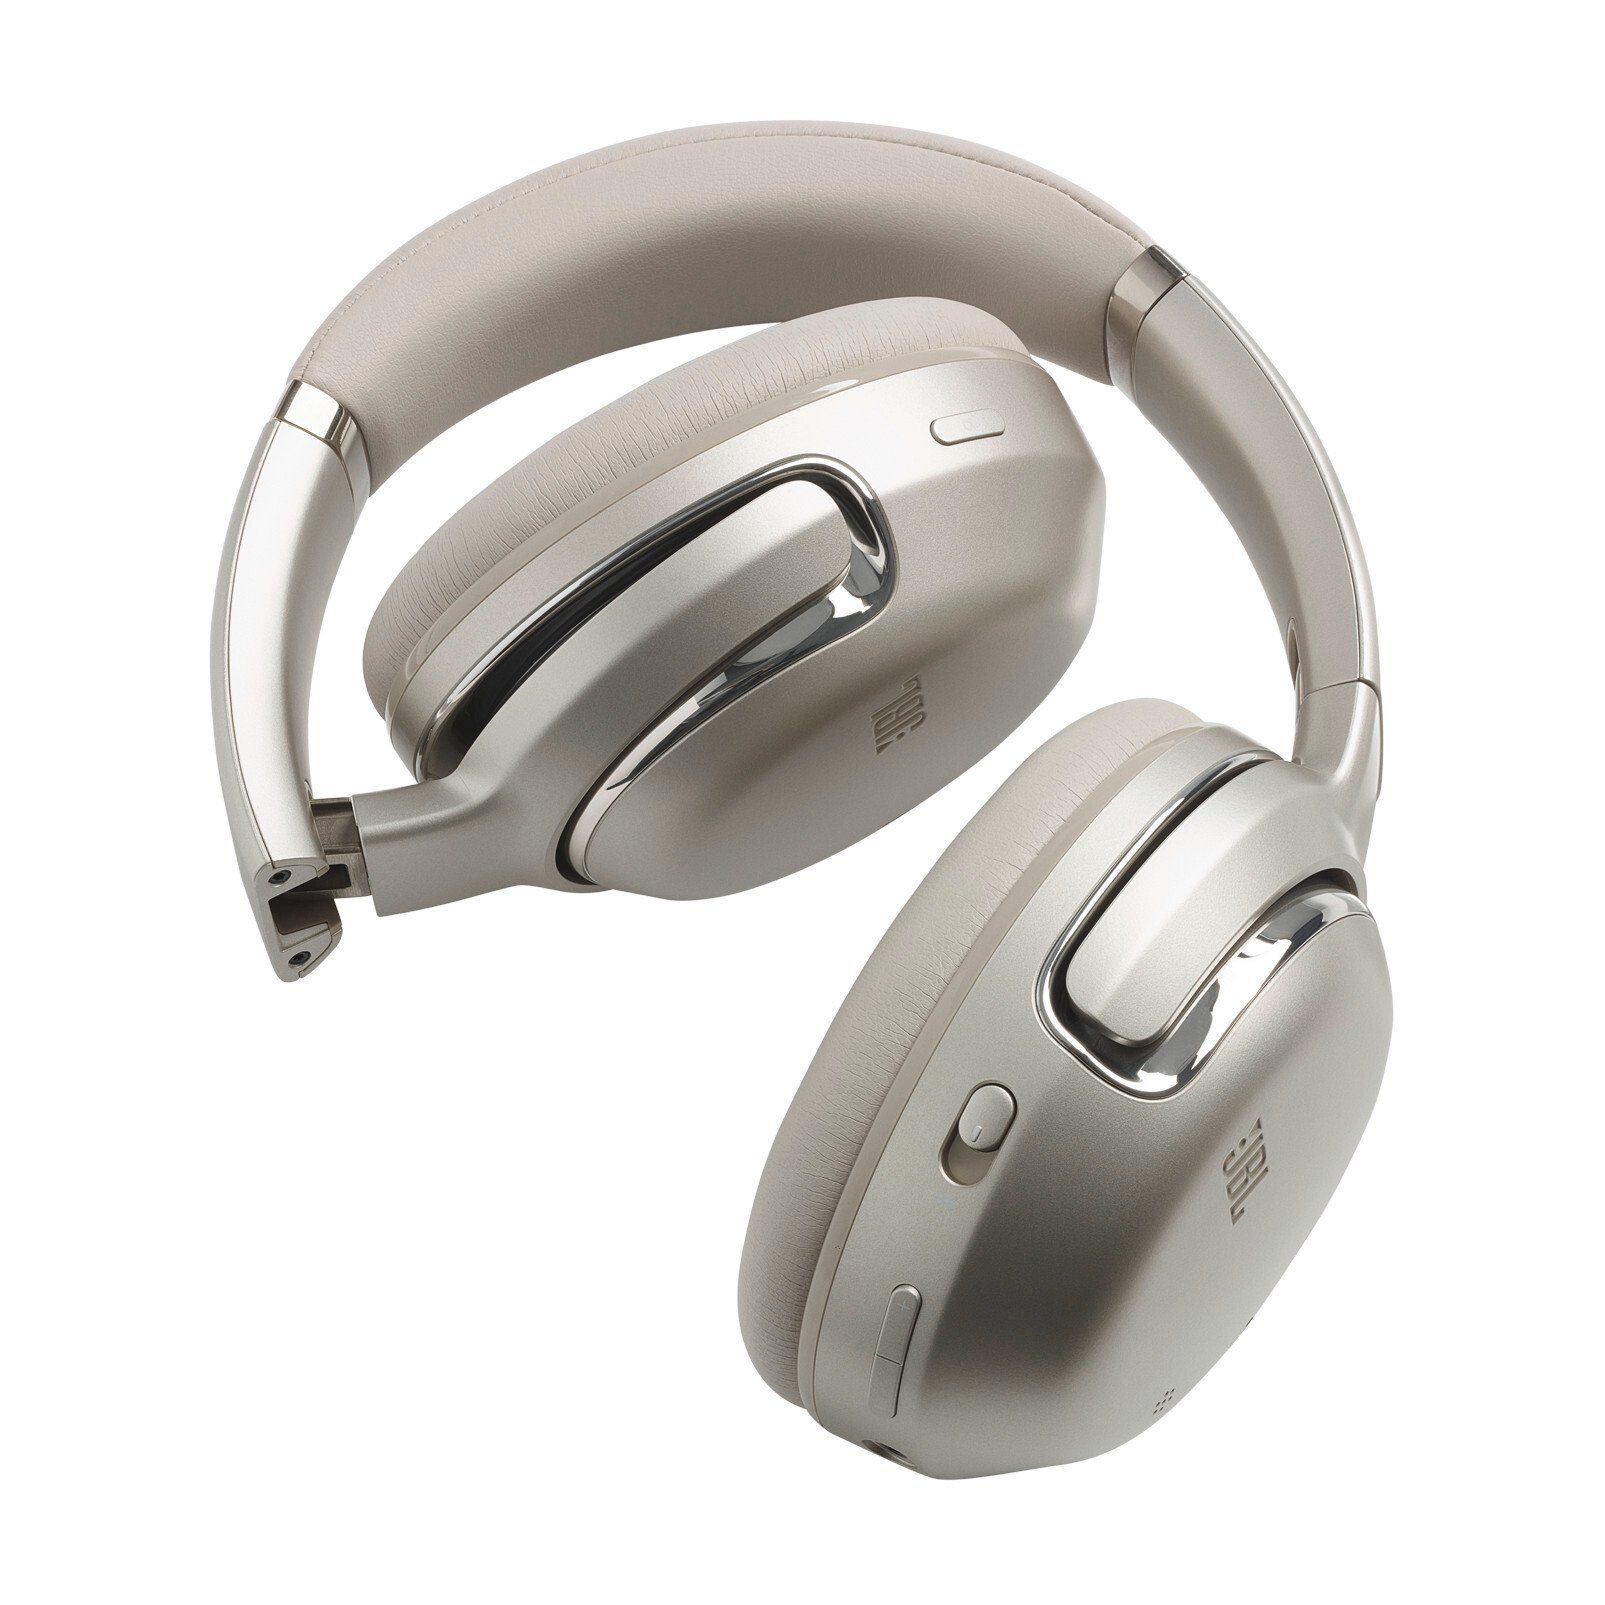 JBL TOUR M2 Champagne Headset ONE (Noise-Cancelling)